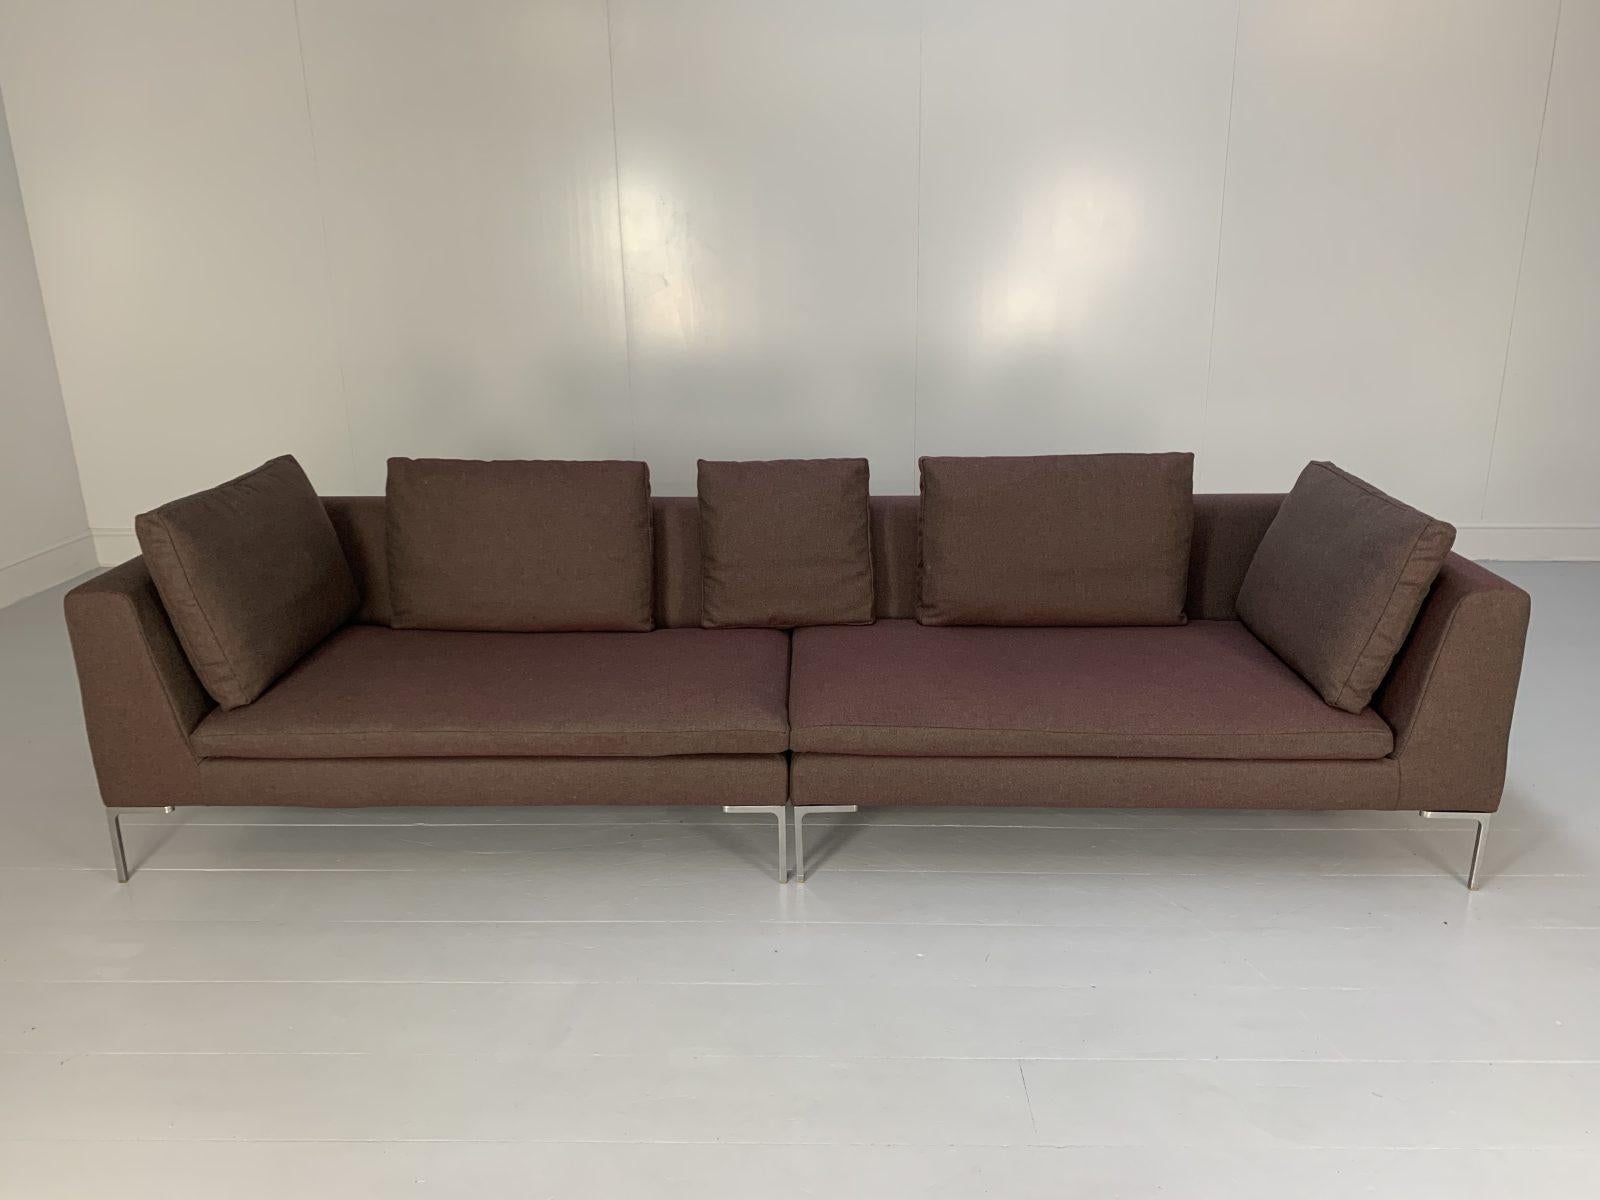 B&B Italia “Charles” Sofa, 4-Seat Sectional, in Purple Wool In Good Condition For Sale In Barrowford, GB